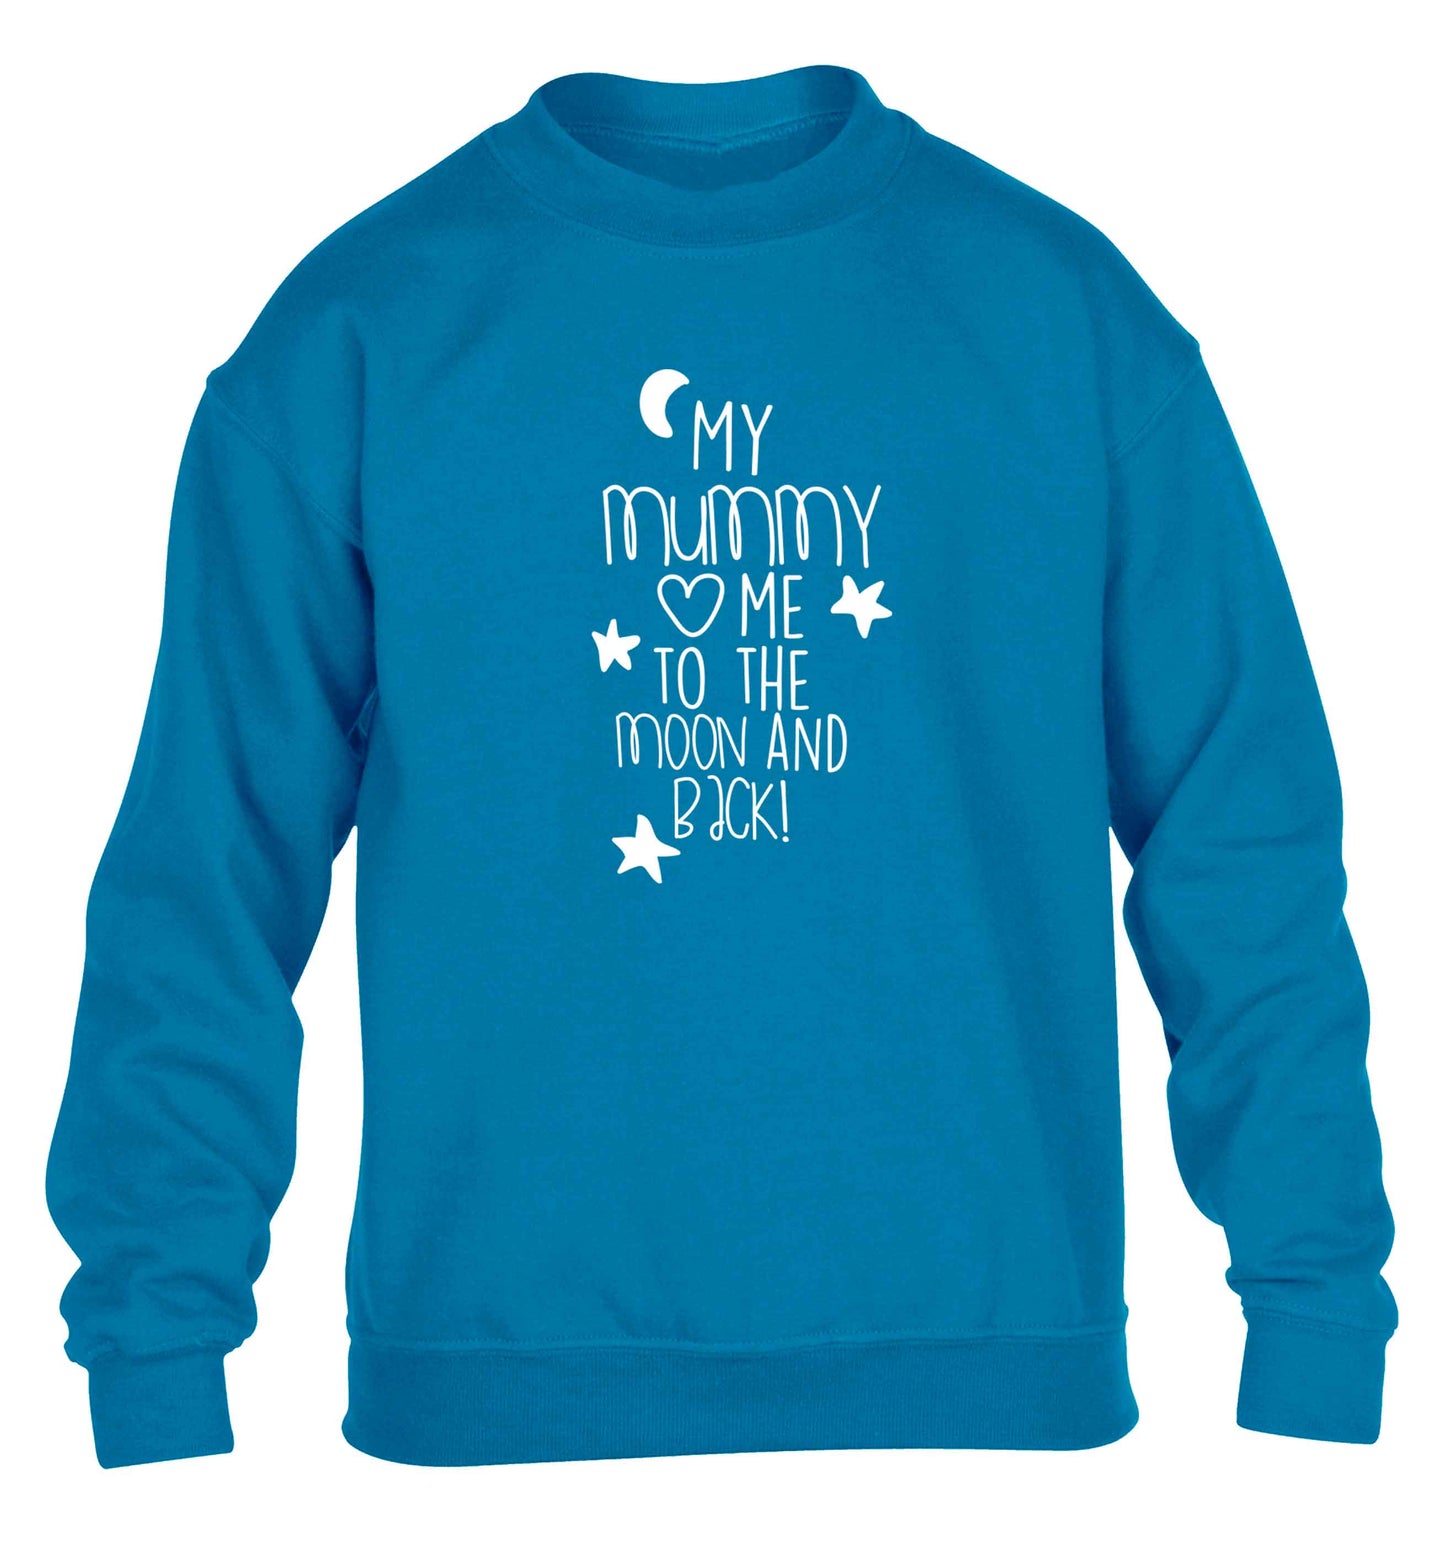 My mum loves me to the moon and back children's blue sweater 12-13 Years